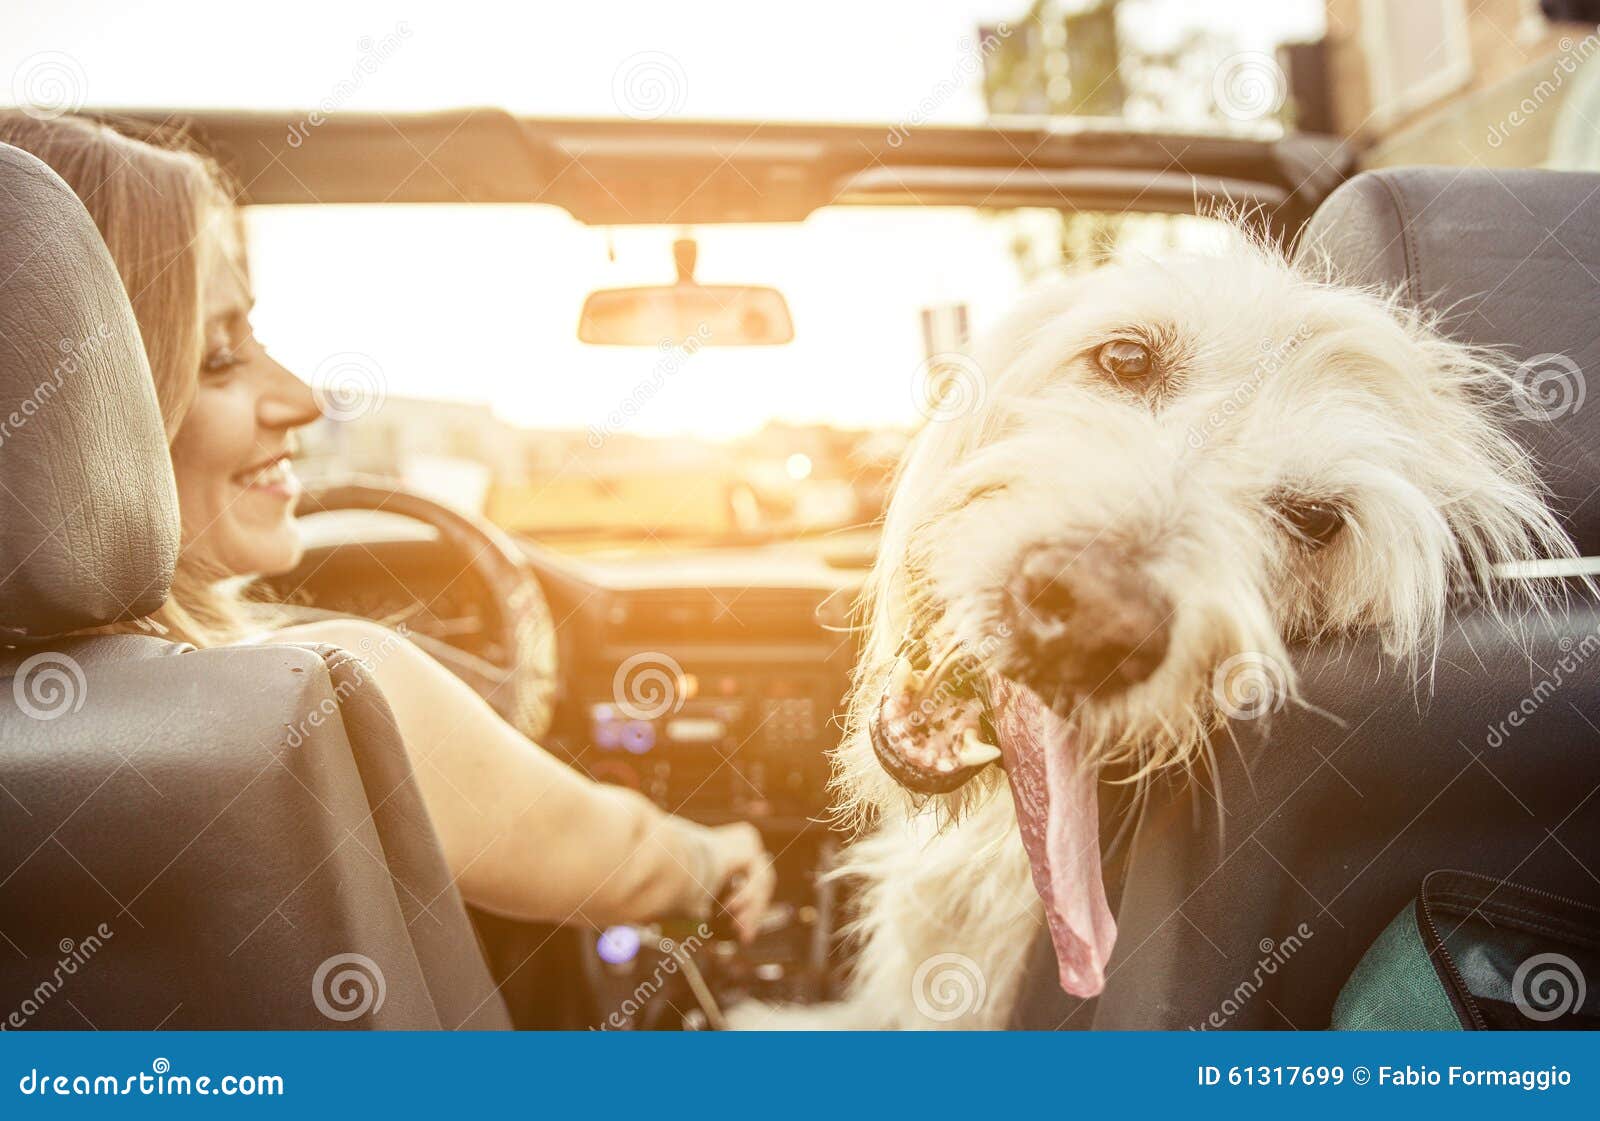 woman and her labradoodle dog driving with the car